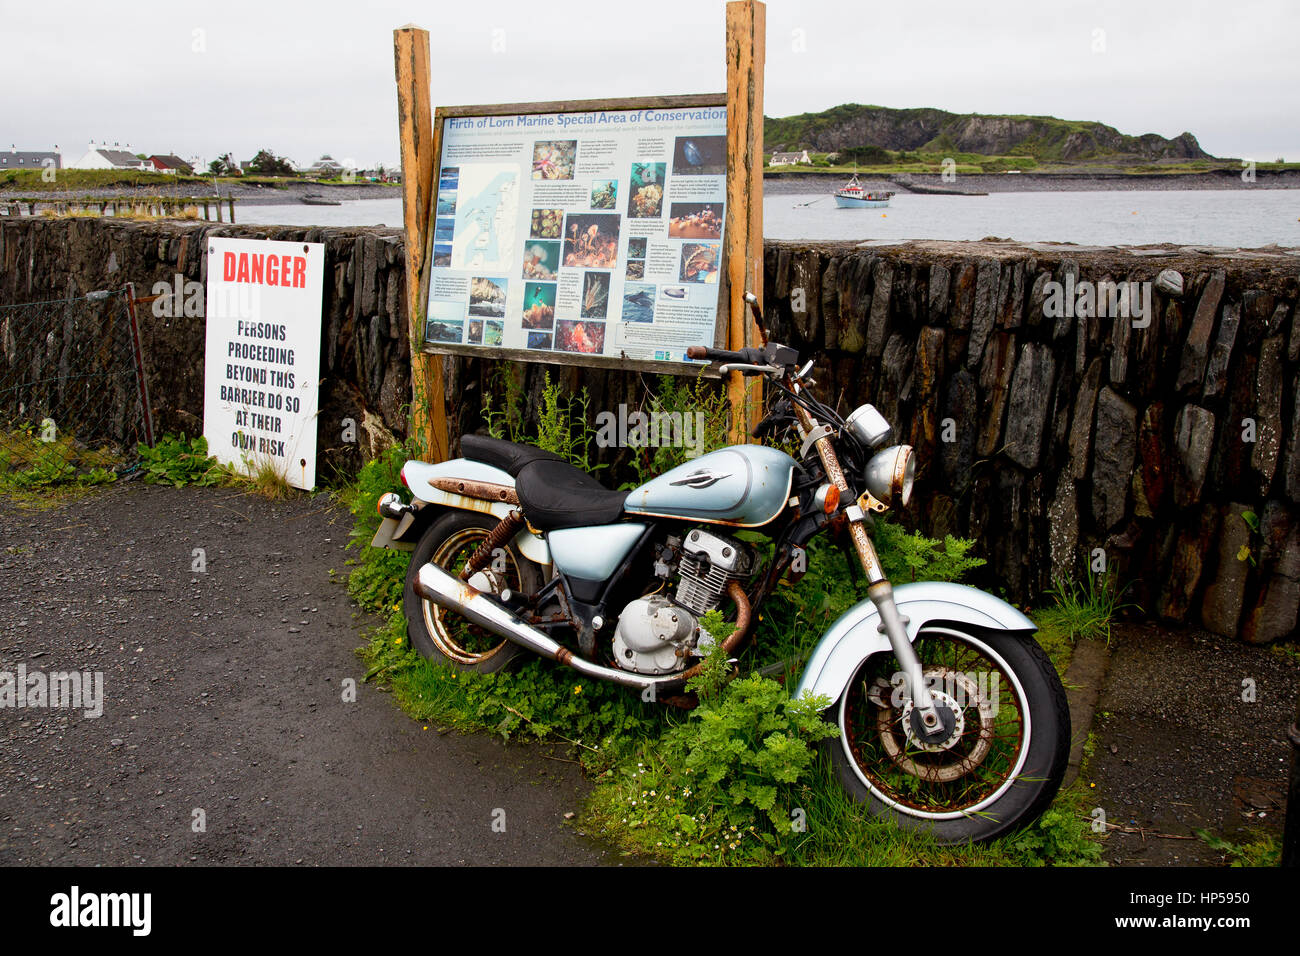 An apparently abandoned motor cycle, next to a sign for The Firth of Lorn marine special area of conservation and a danger sign. Stock Photo